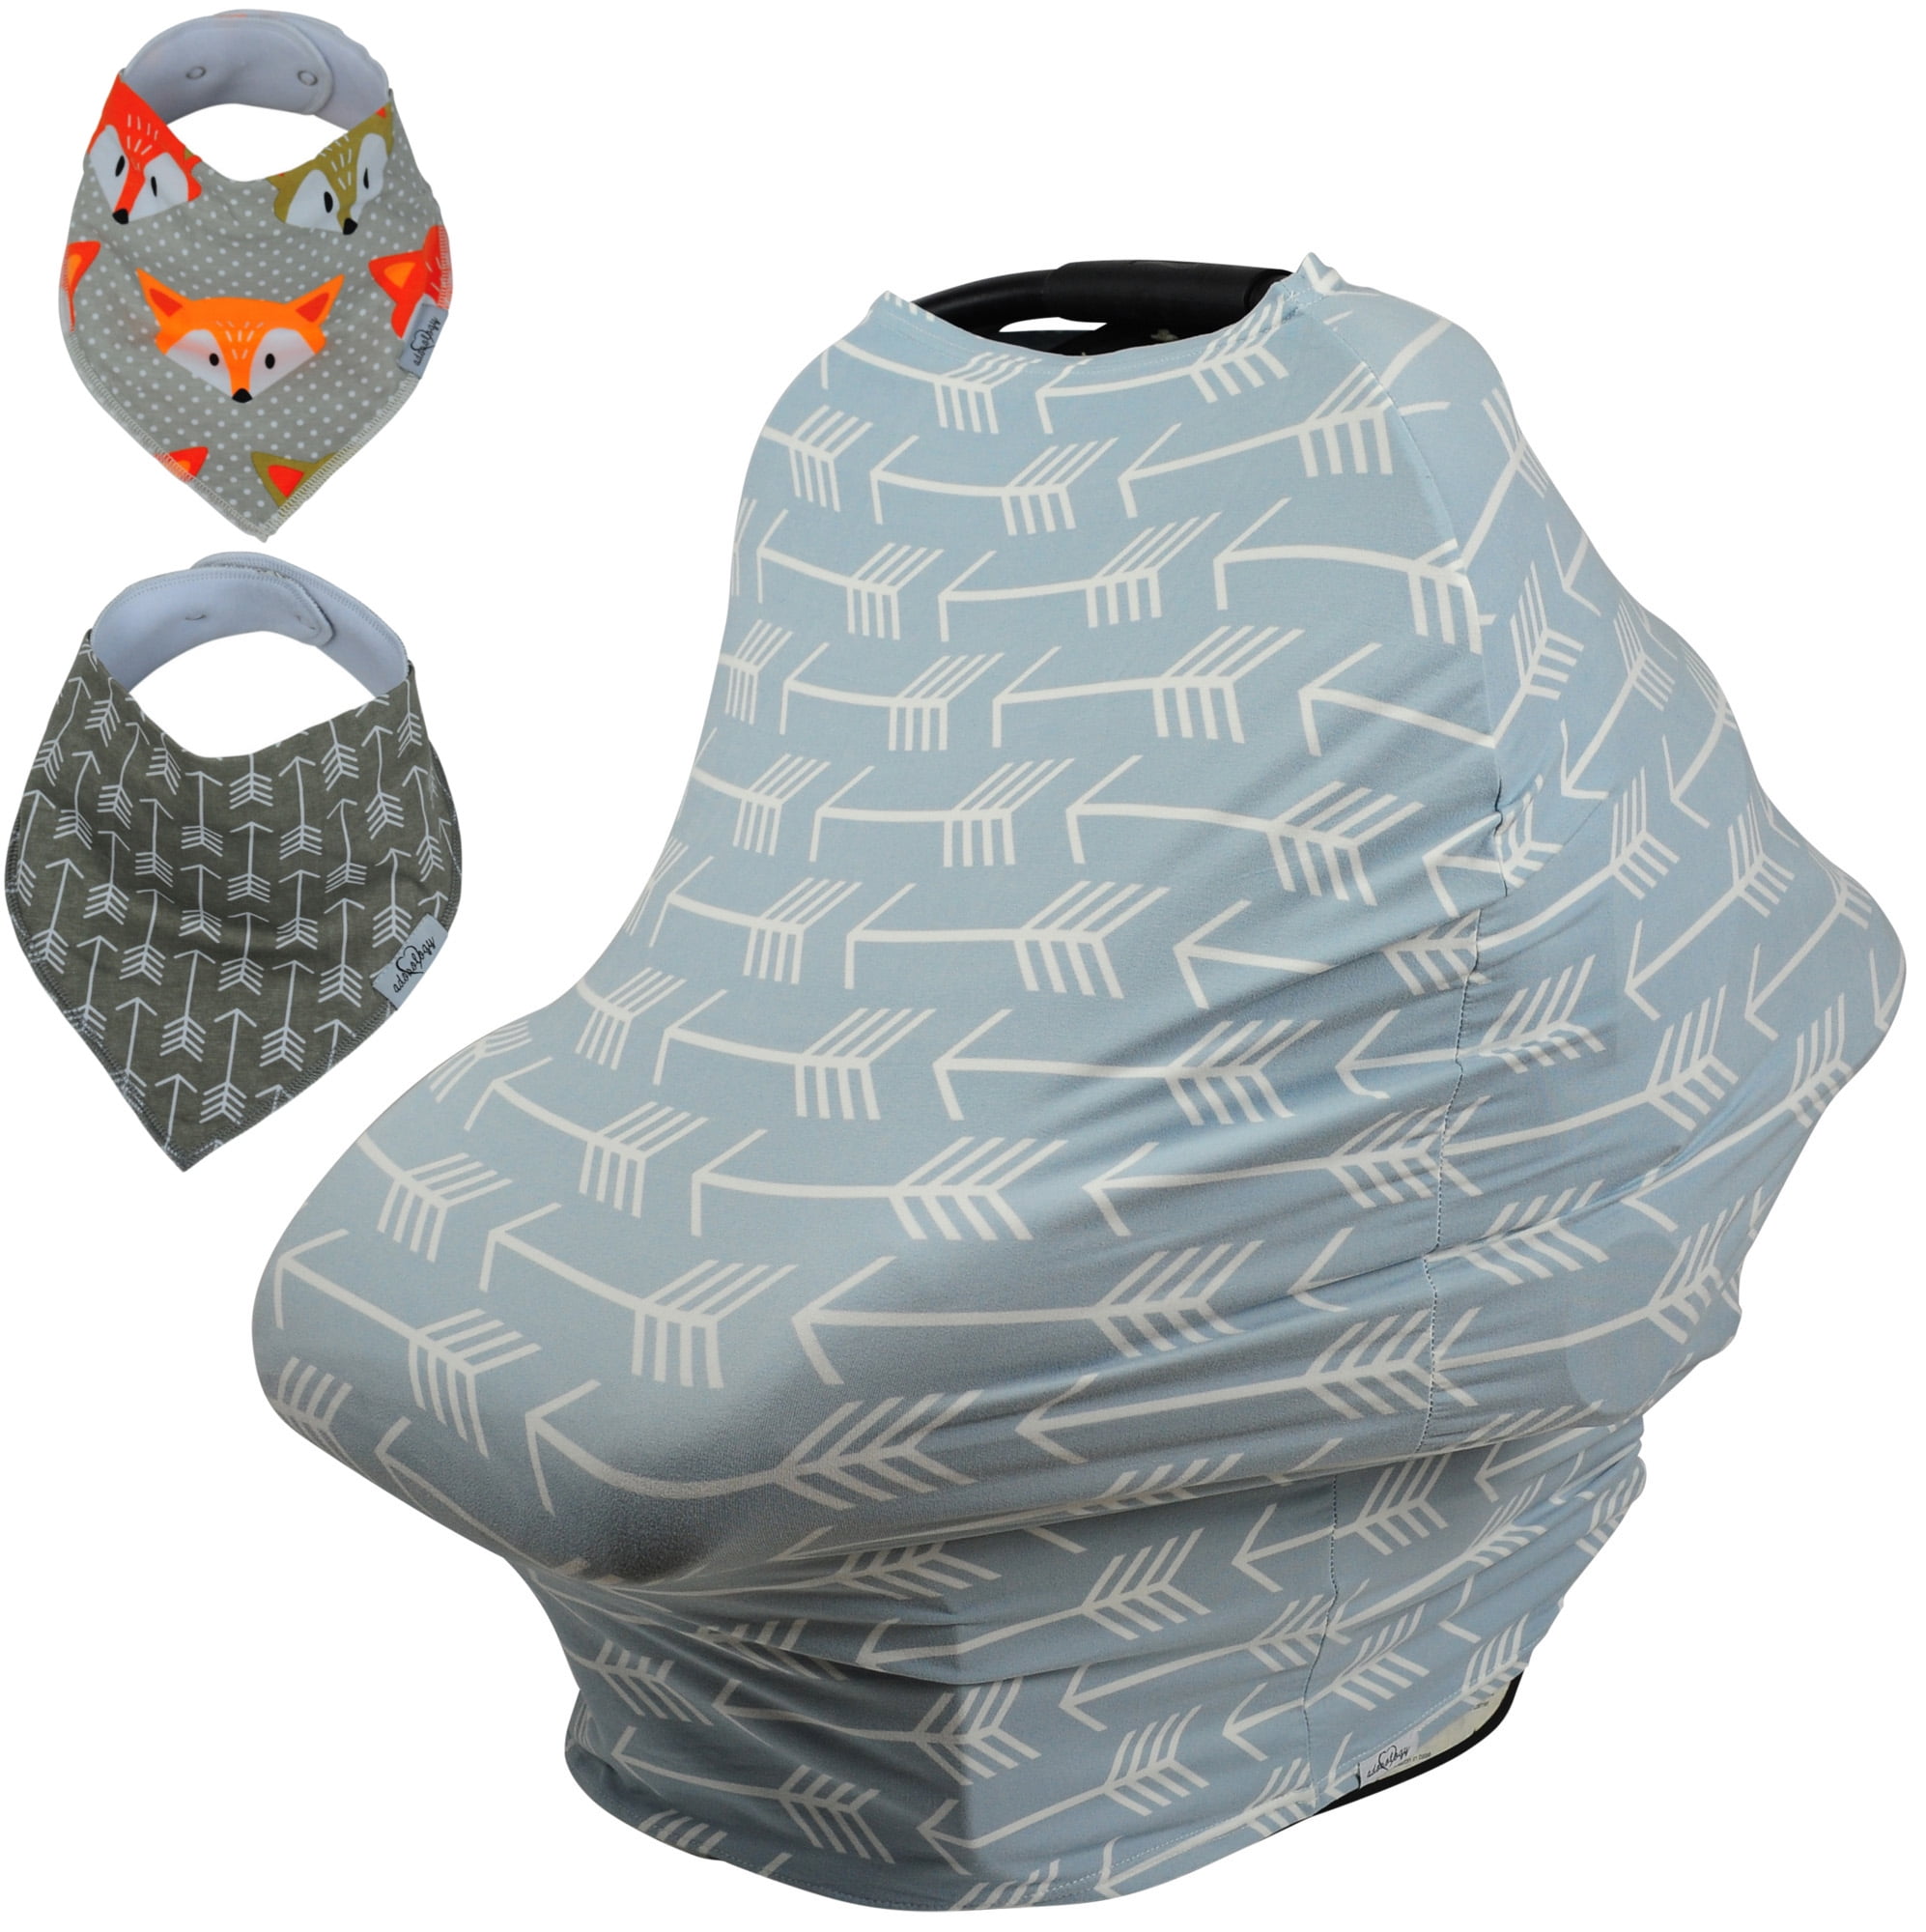 Shopping Cart High Chair and Stroller Bundle Nursing Pillow Cover and Multi Use Nursing Cover Grey Arrow Car Seat Canopy 